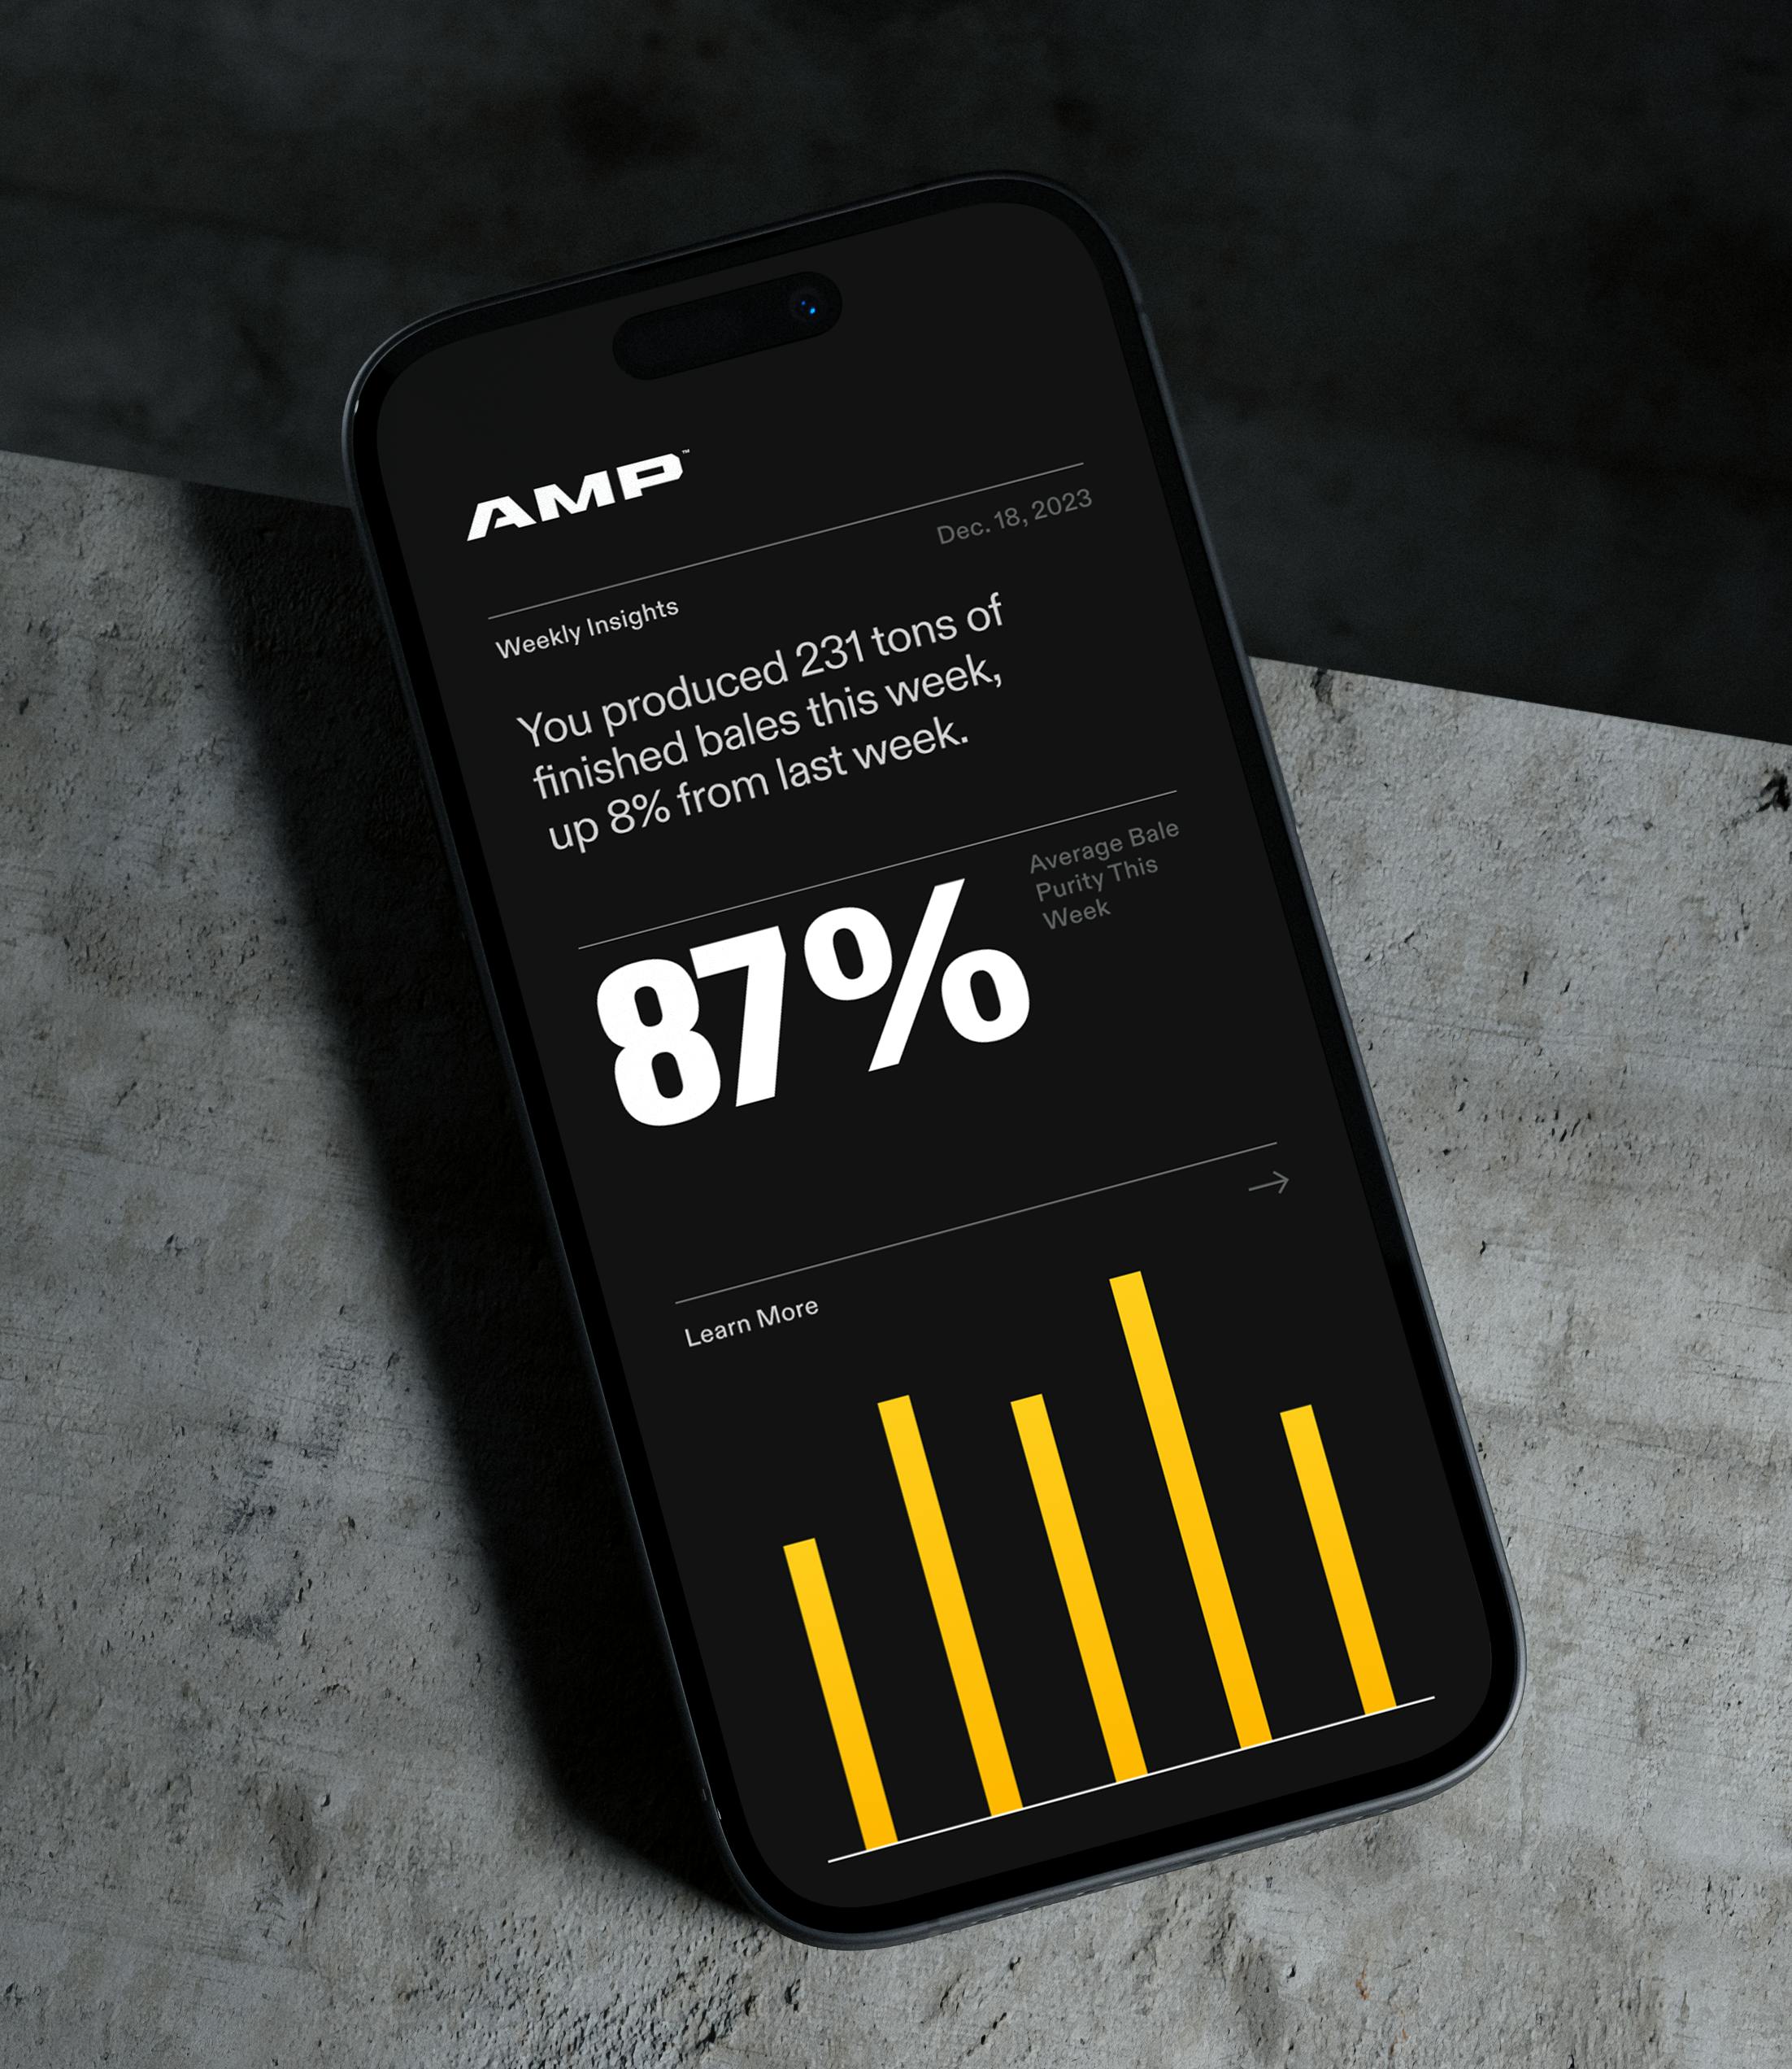 A mobile phone screen shows data and results captured from AMP's AI and insights platform.